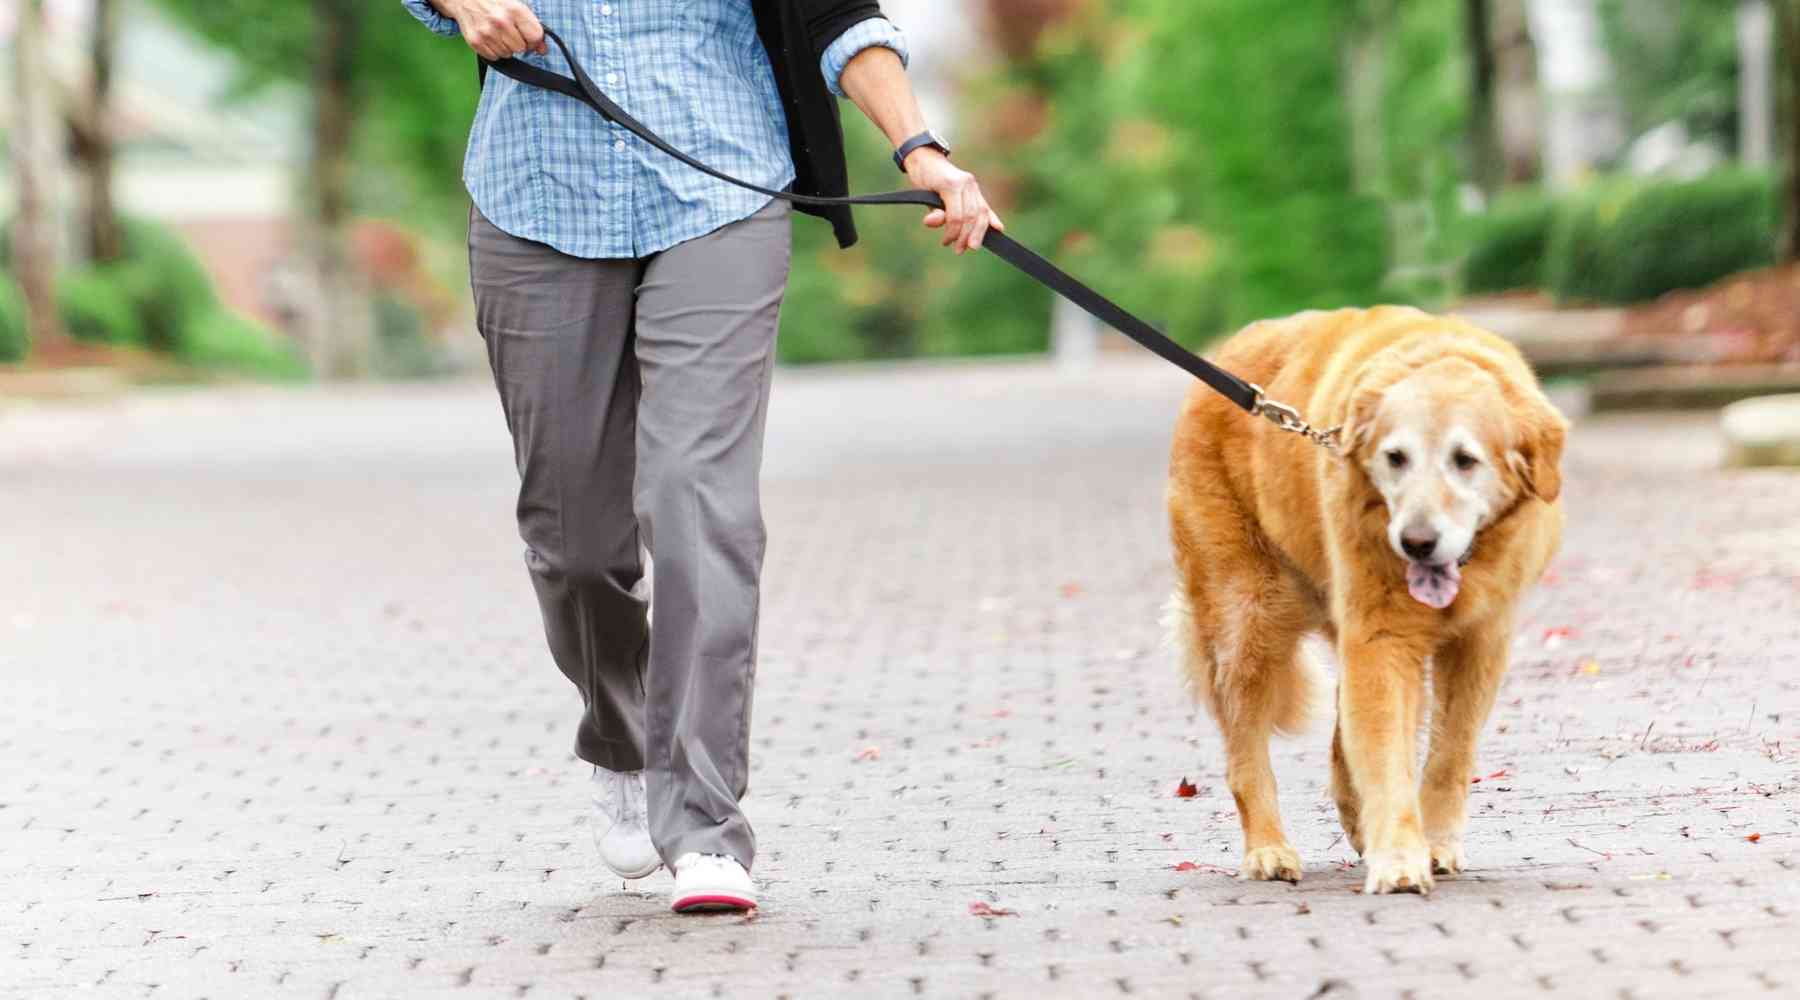 How to Make Money Without a Job - Dog Walking